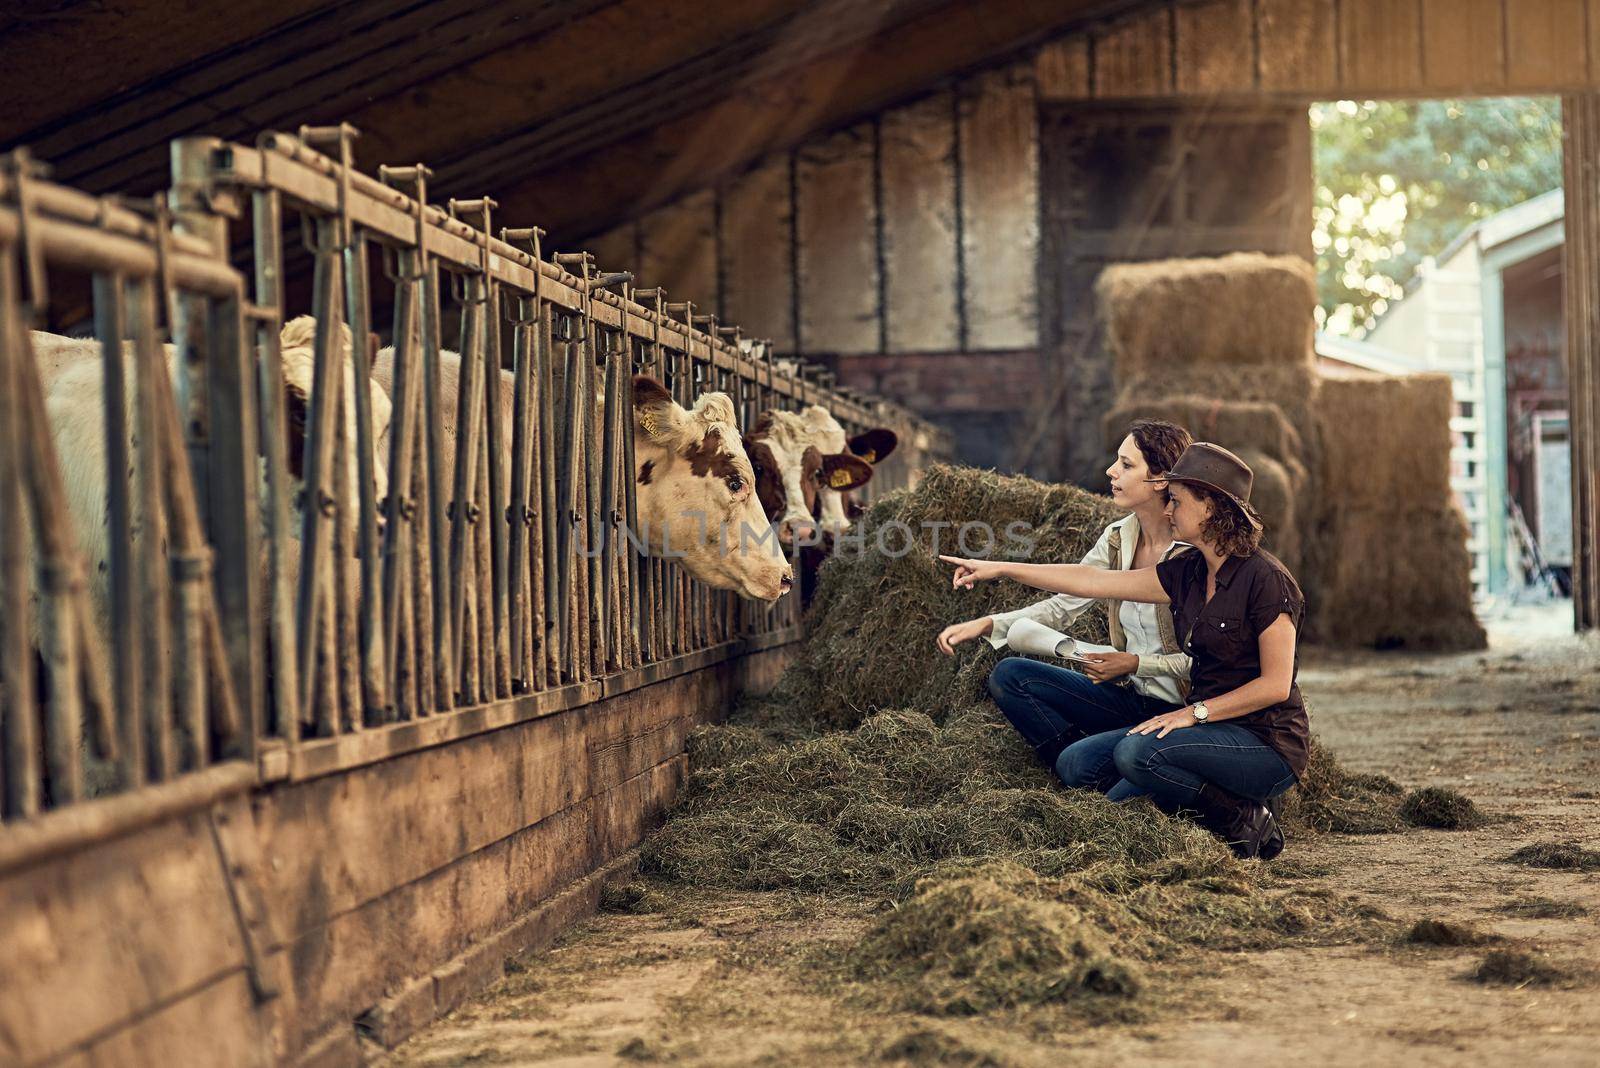 Quality control is everything. two female farmers taking care of their cattle in the barn. by YuriArcurs